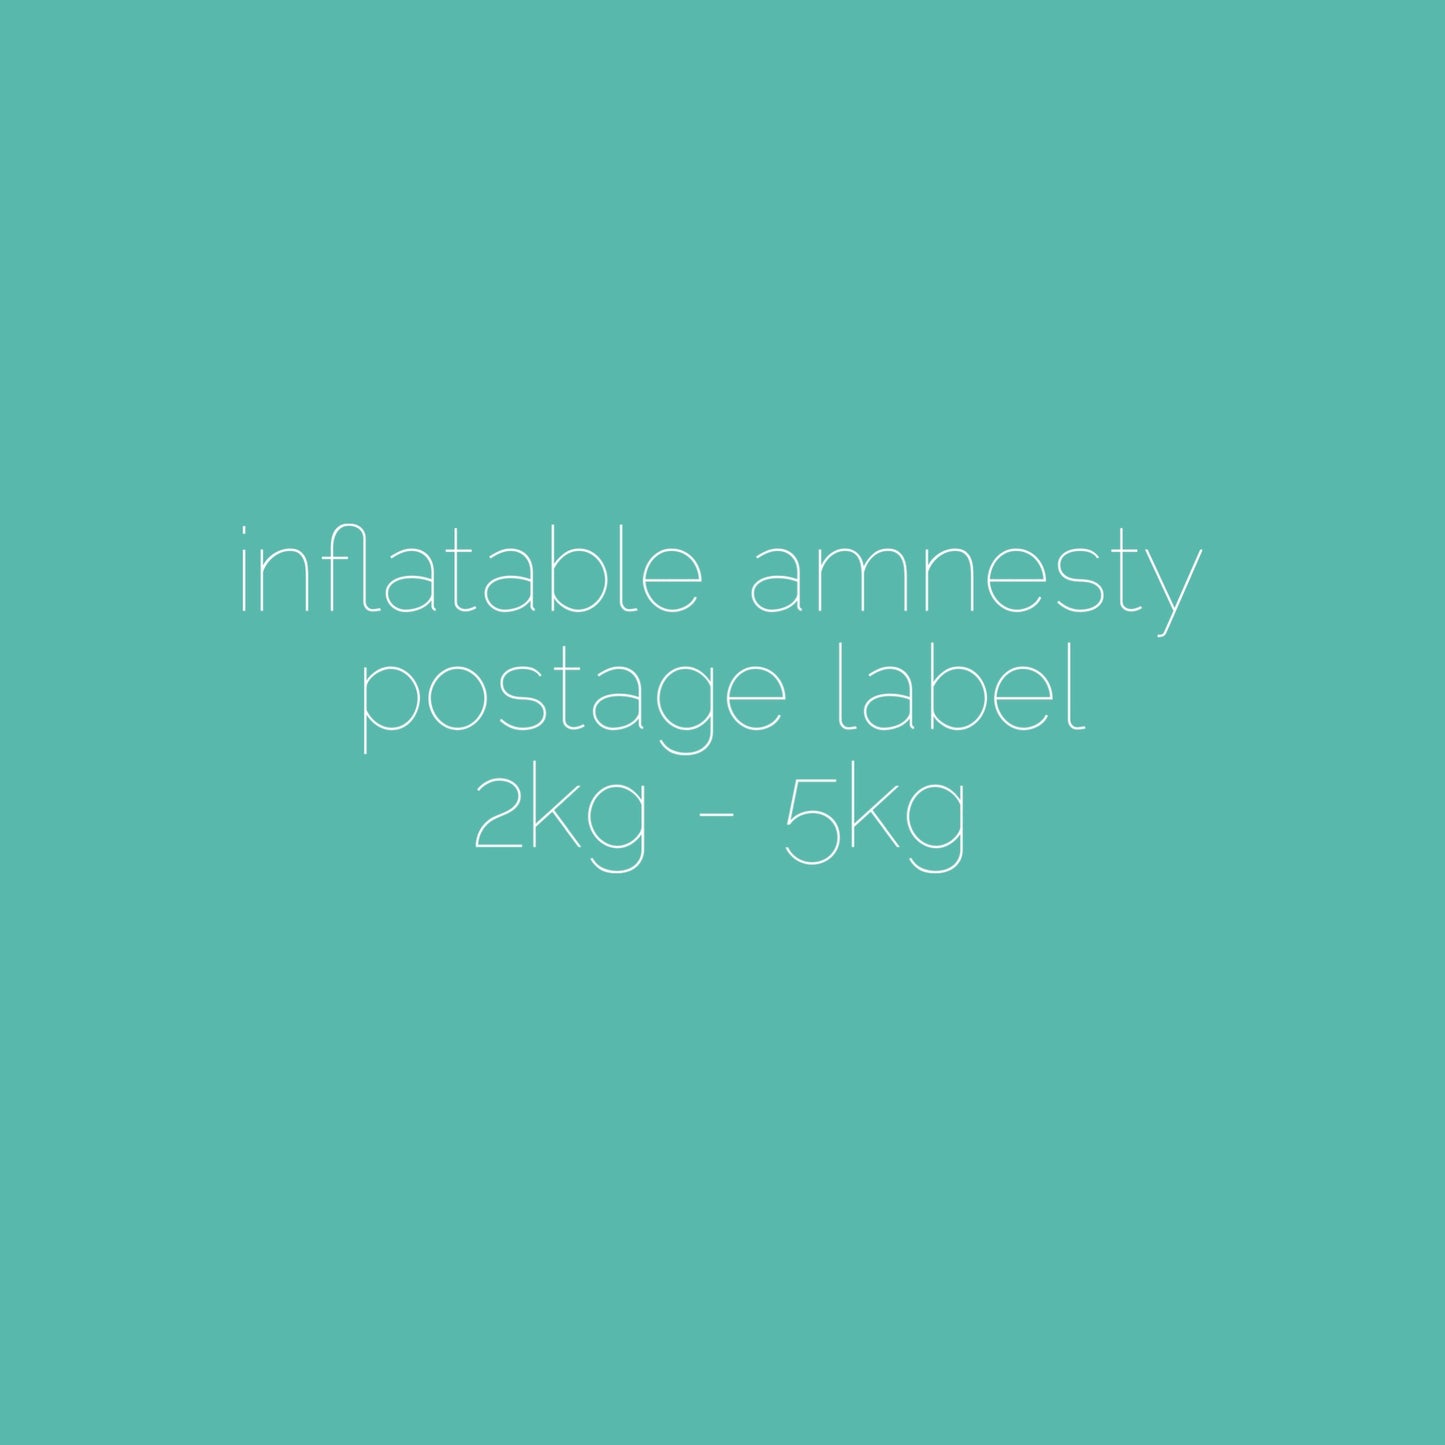 Postage Labels / Send Us An Inflatable